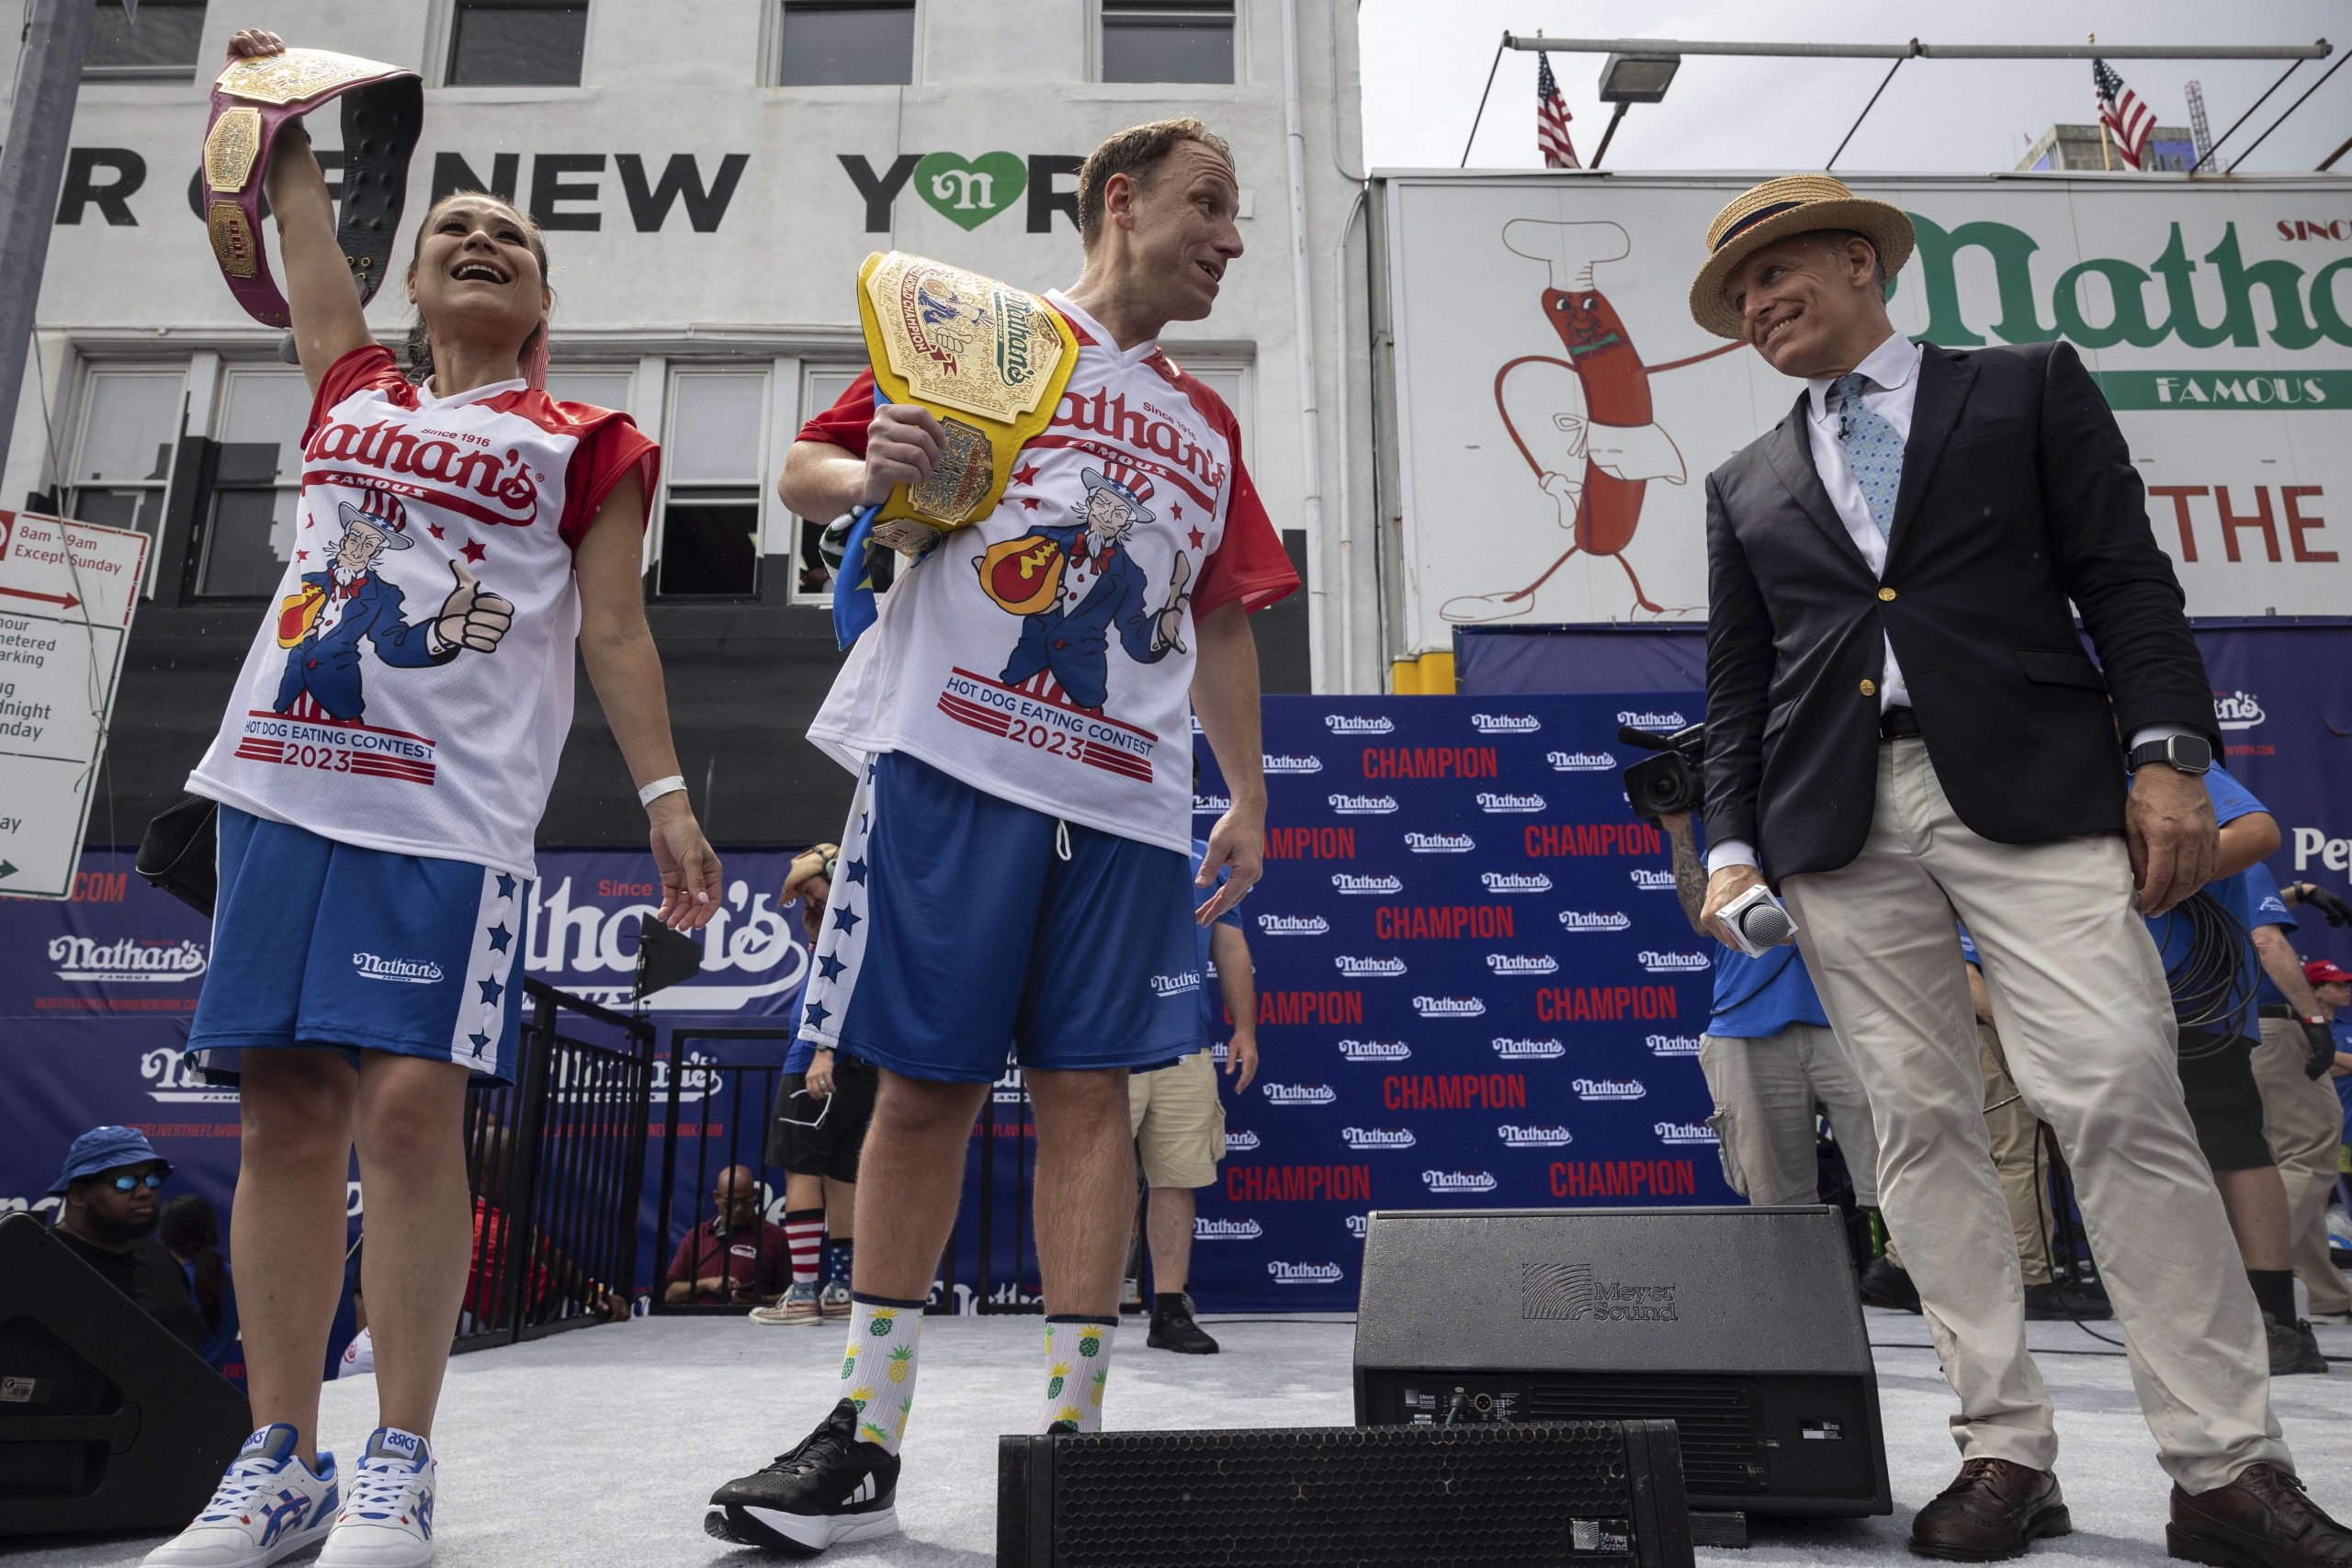 Joey Chestnut shakes off rain delay and defends title at Nathan's